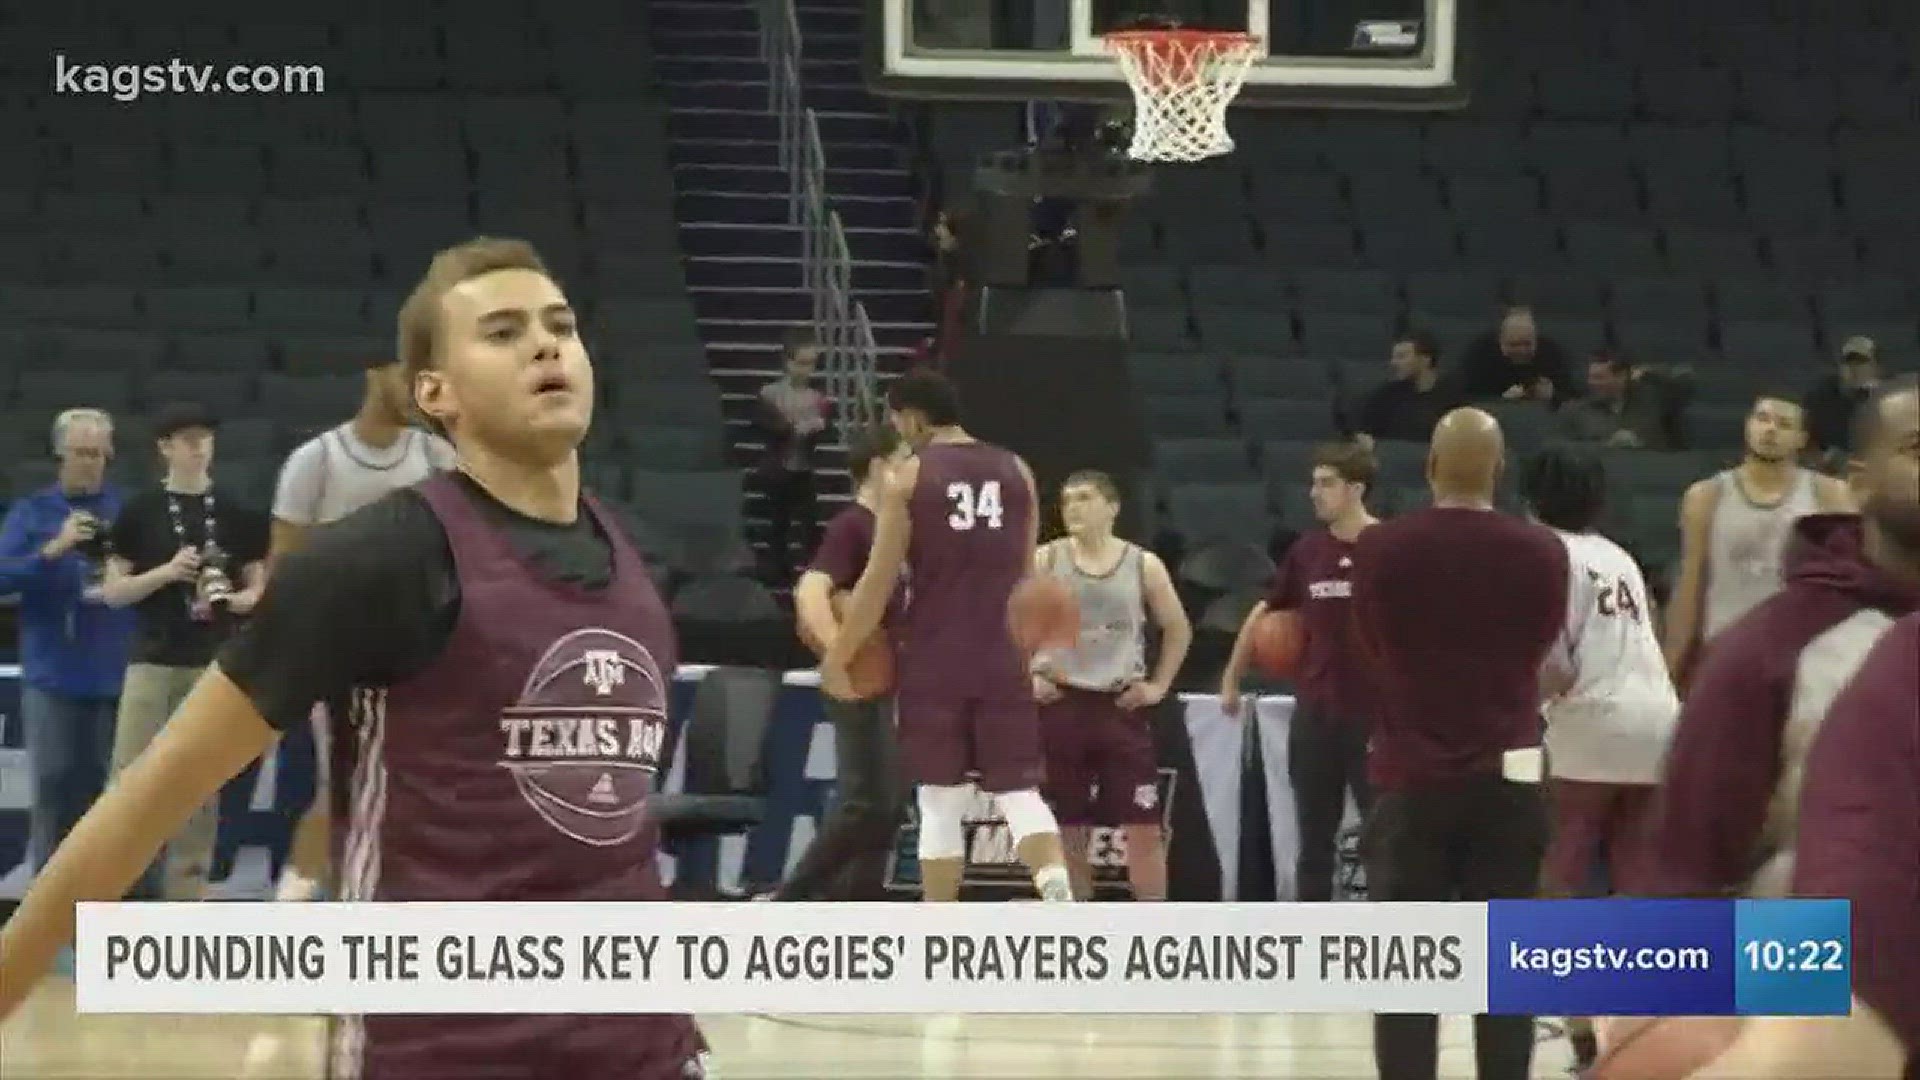 Friar players marveled at A&M's size saying they resembled "an NBA team".